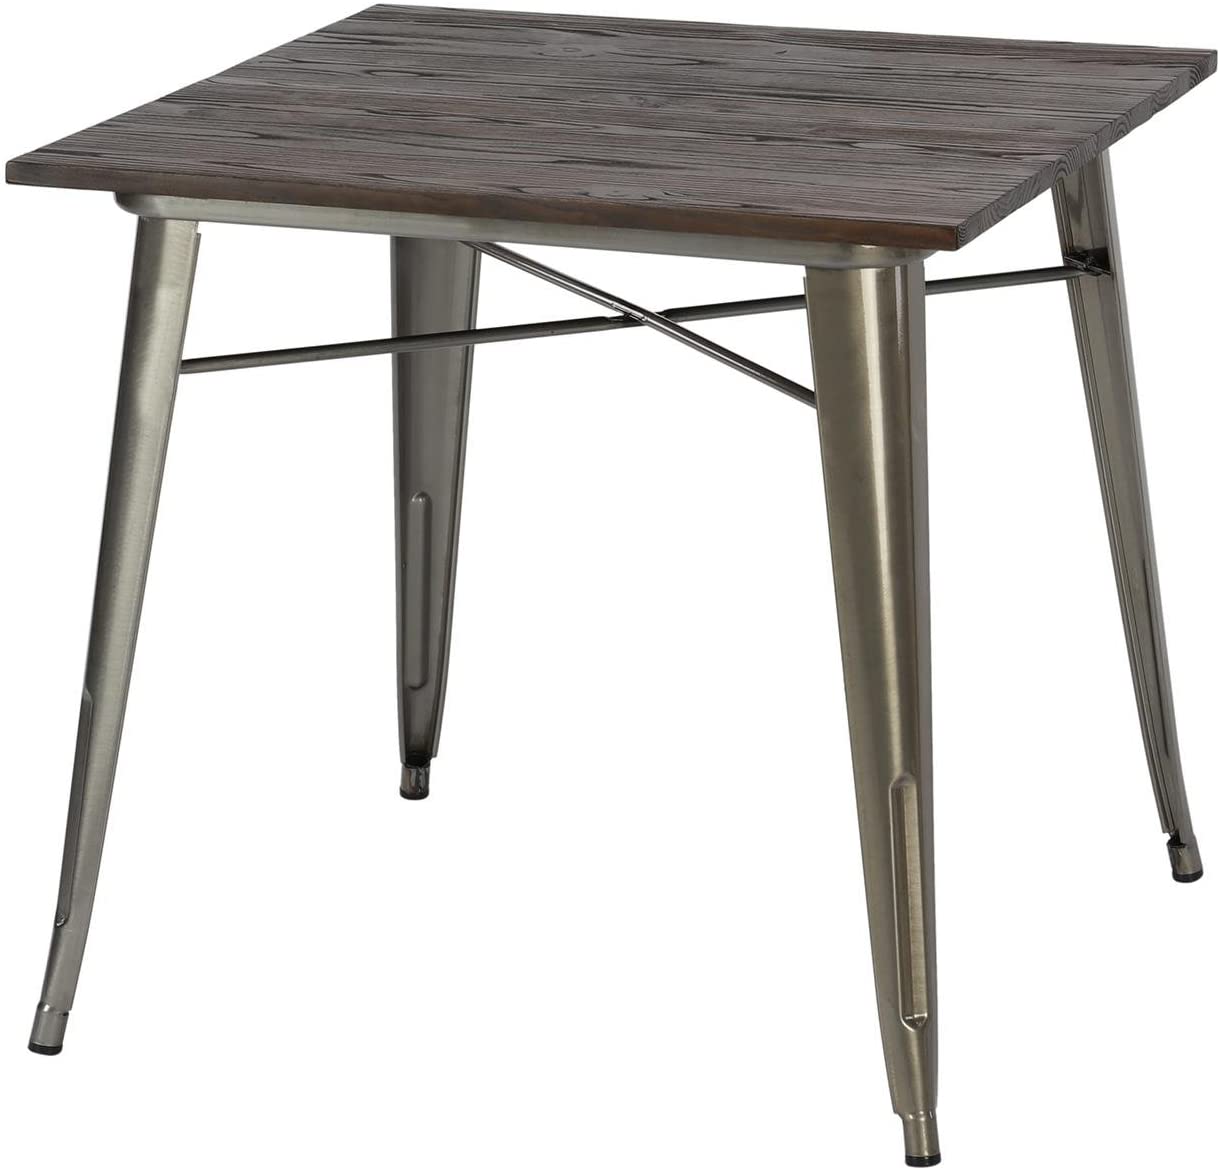 B01IONZPTK DHP Fusion Metal Square Dining Table with Wood Table Top, Distressed Metal Finish for Industrial Appeal, Antique Gun Metal